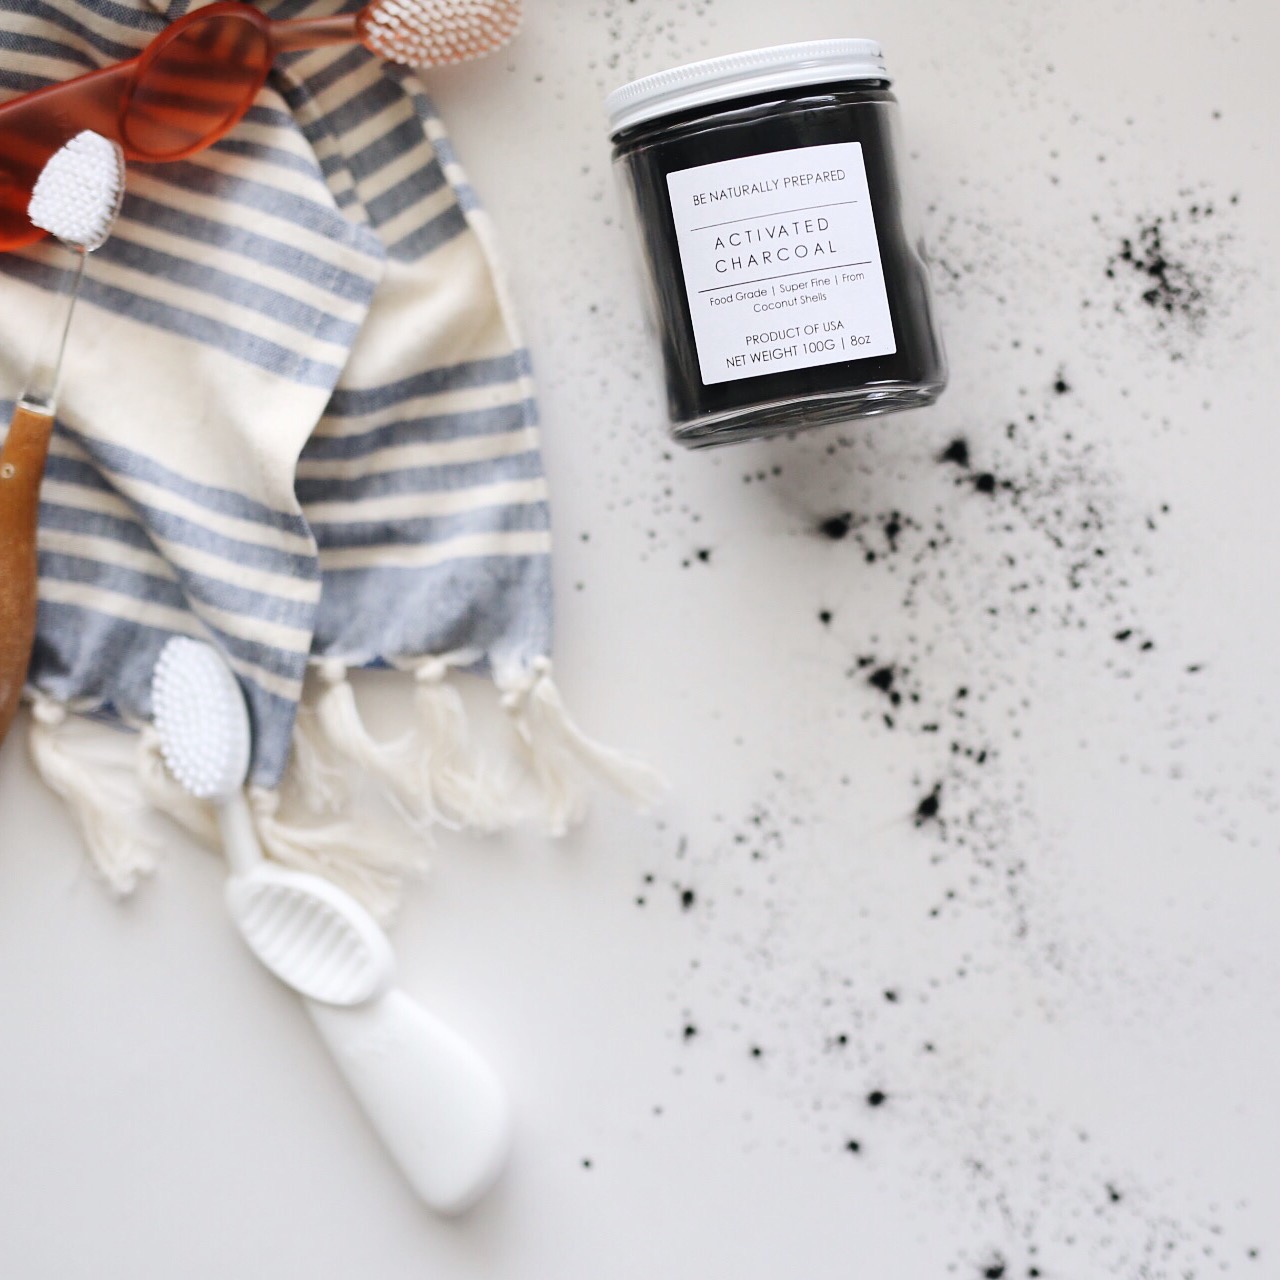 whitening your teeth with activated charcoal | elanaloo.com